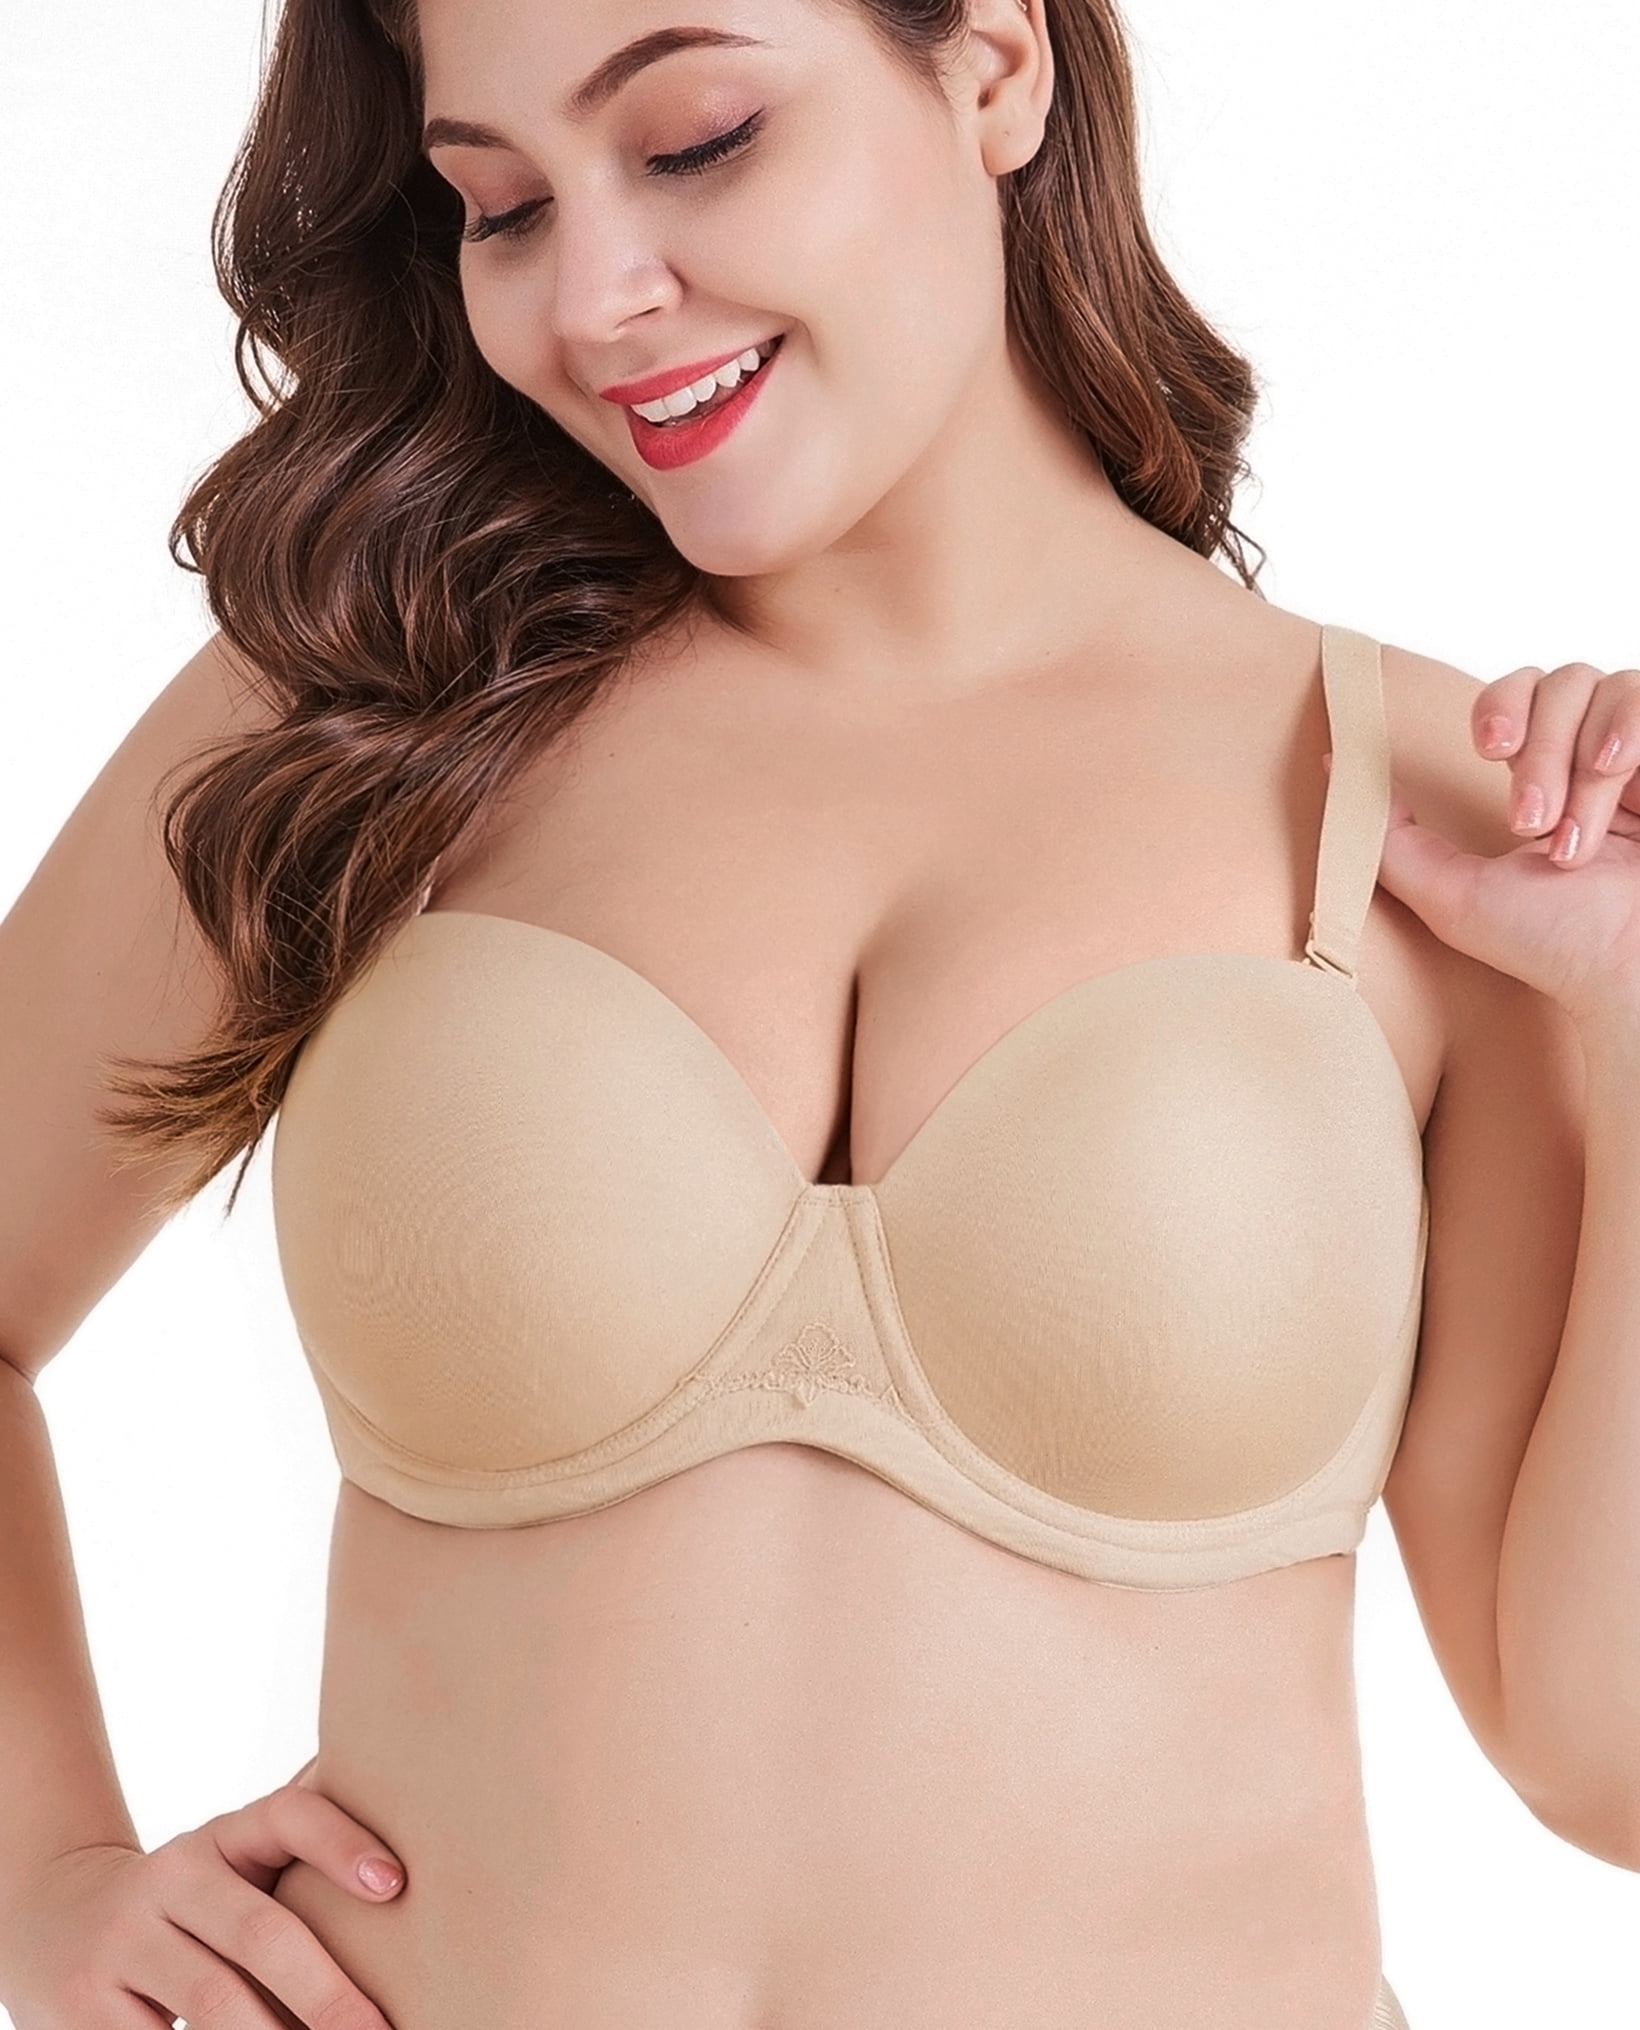  Full Support Non-Slip Convertible Bandeau Bra,Detachable-Strap  Bandeau Bra,Comfort Soft Strapless Push Up Seamless Bralette. (75G, Beige)  : Clothing, Shoes & Jewelry